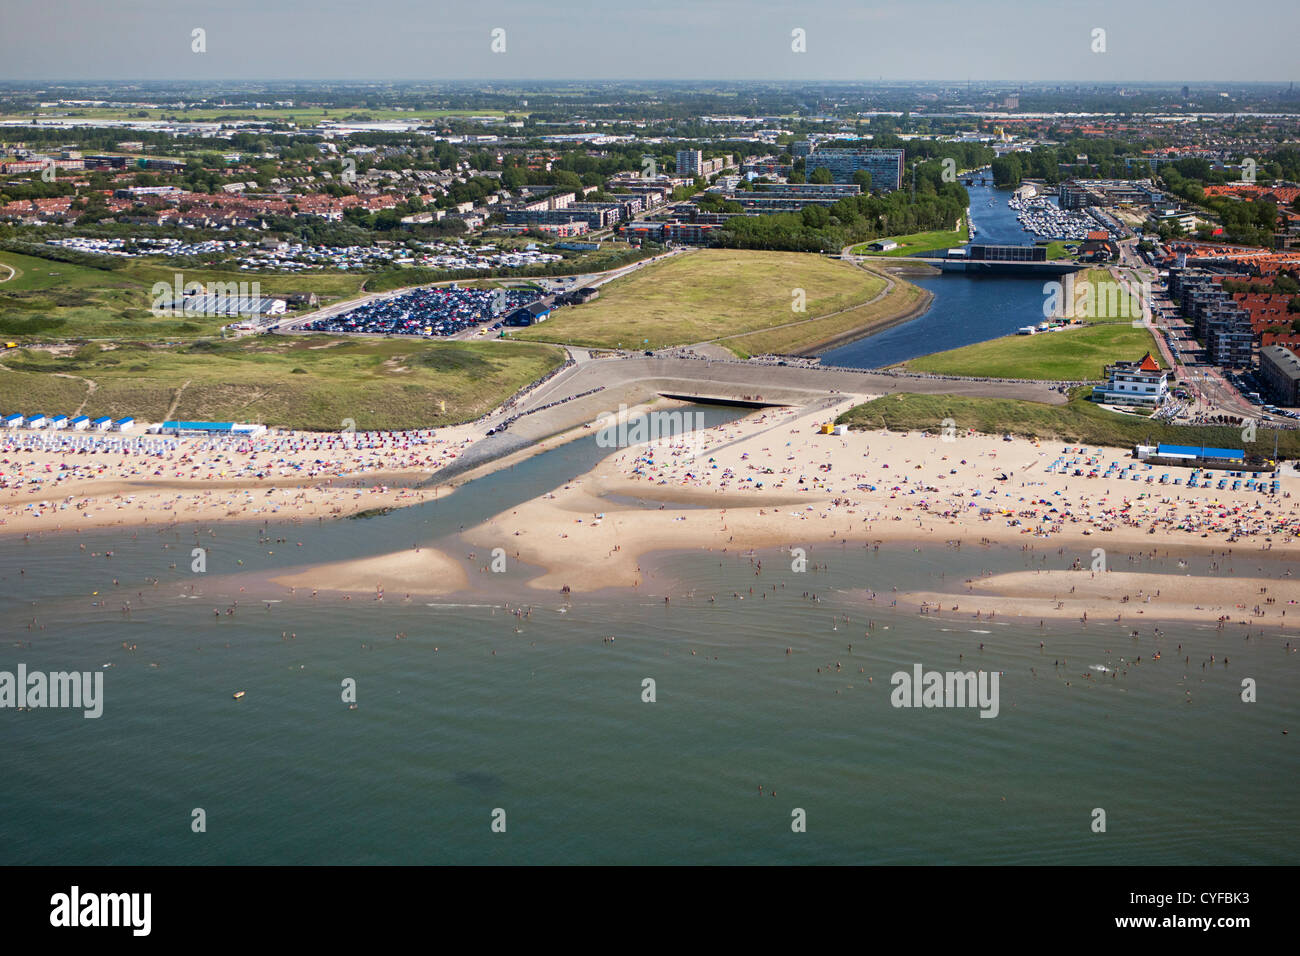 The Netherlands, Katwijk. Mouth of Rhine river. People sunbathing and  swimming at beach of North Sea. Aerial Stock Photo - Alamy